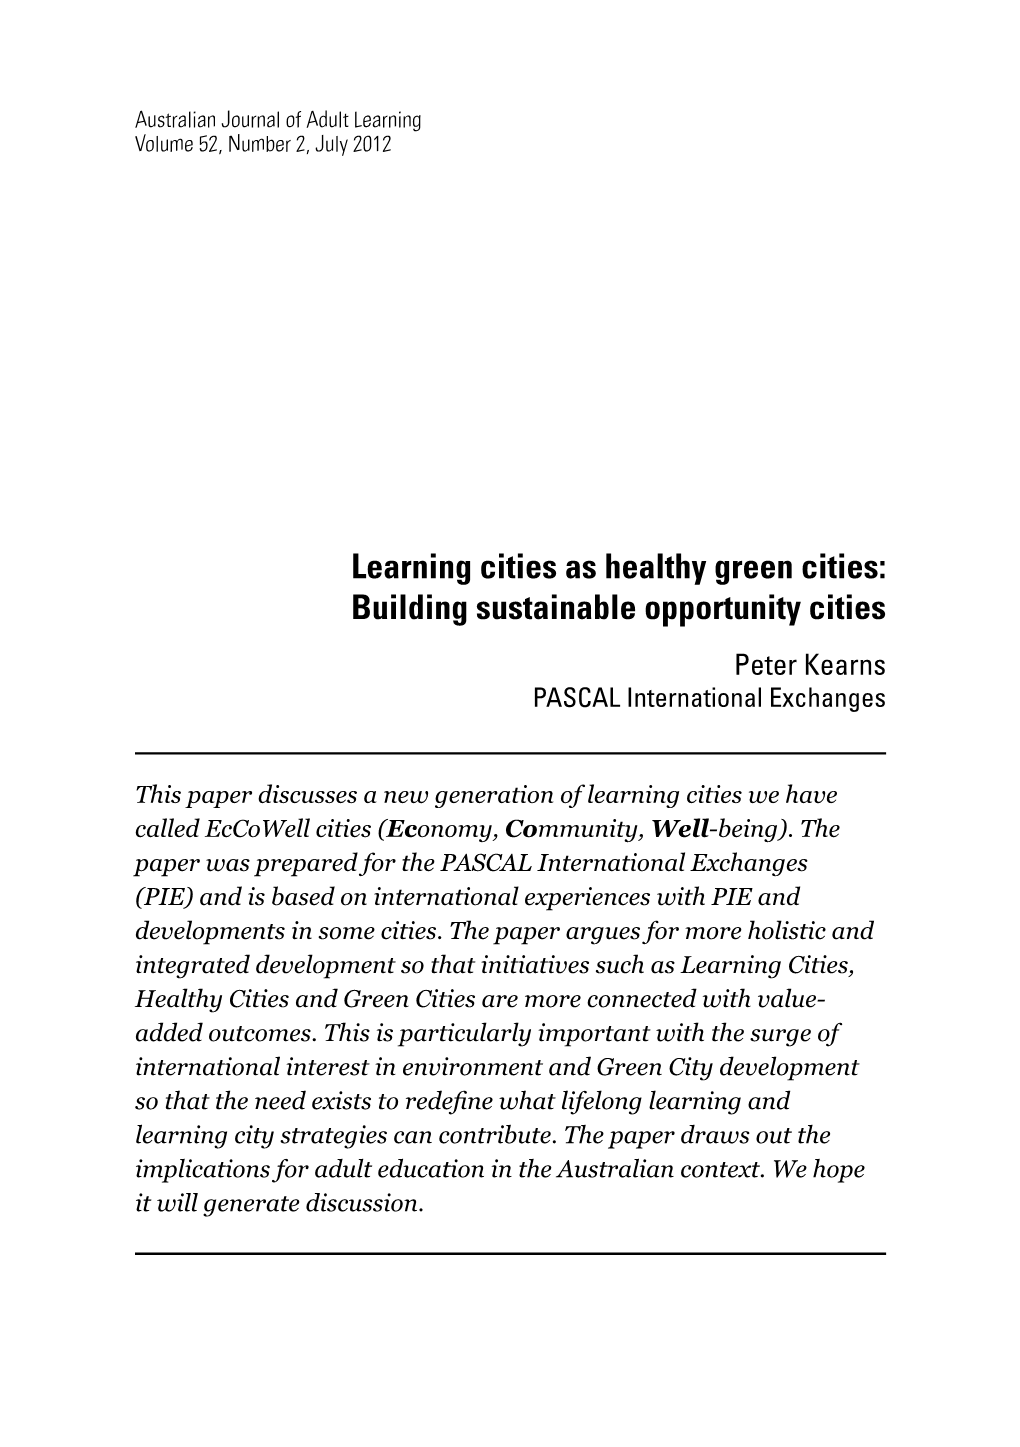 Learning Cities As Healthy Green Cities: Building Sustainable Opportunity Cities Peter Kearns PASCAL International Exchanges